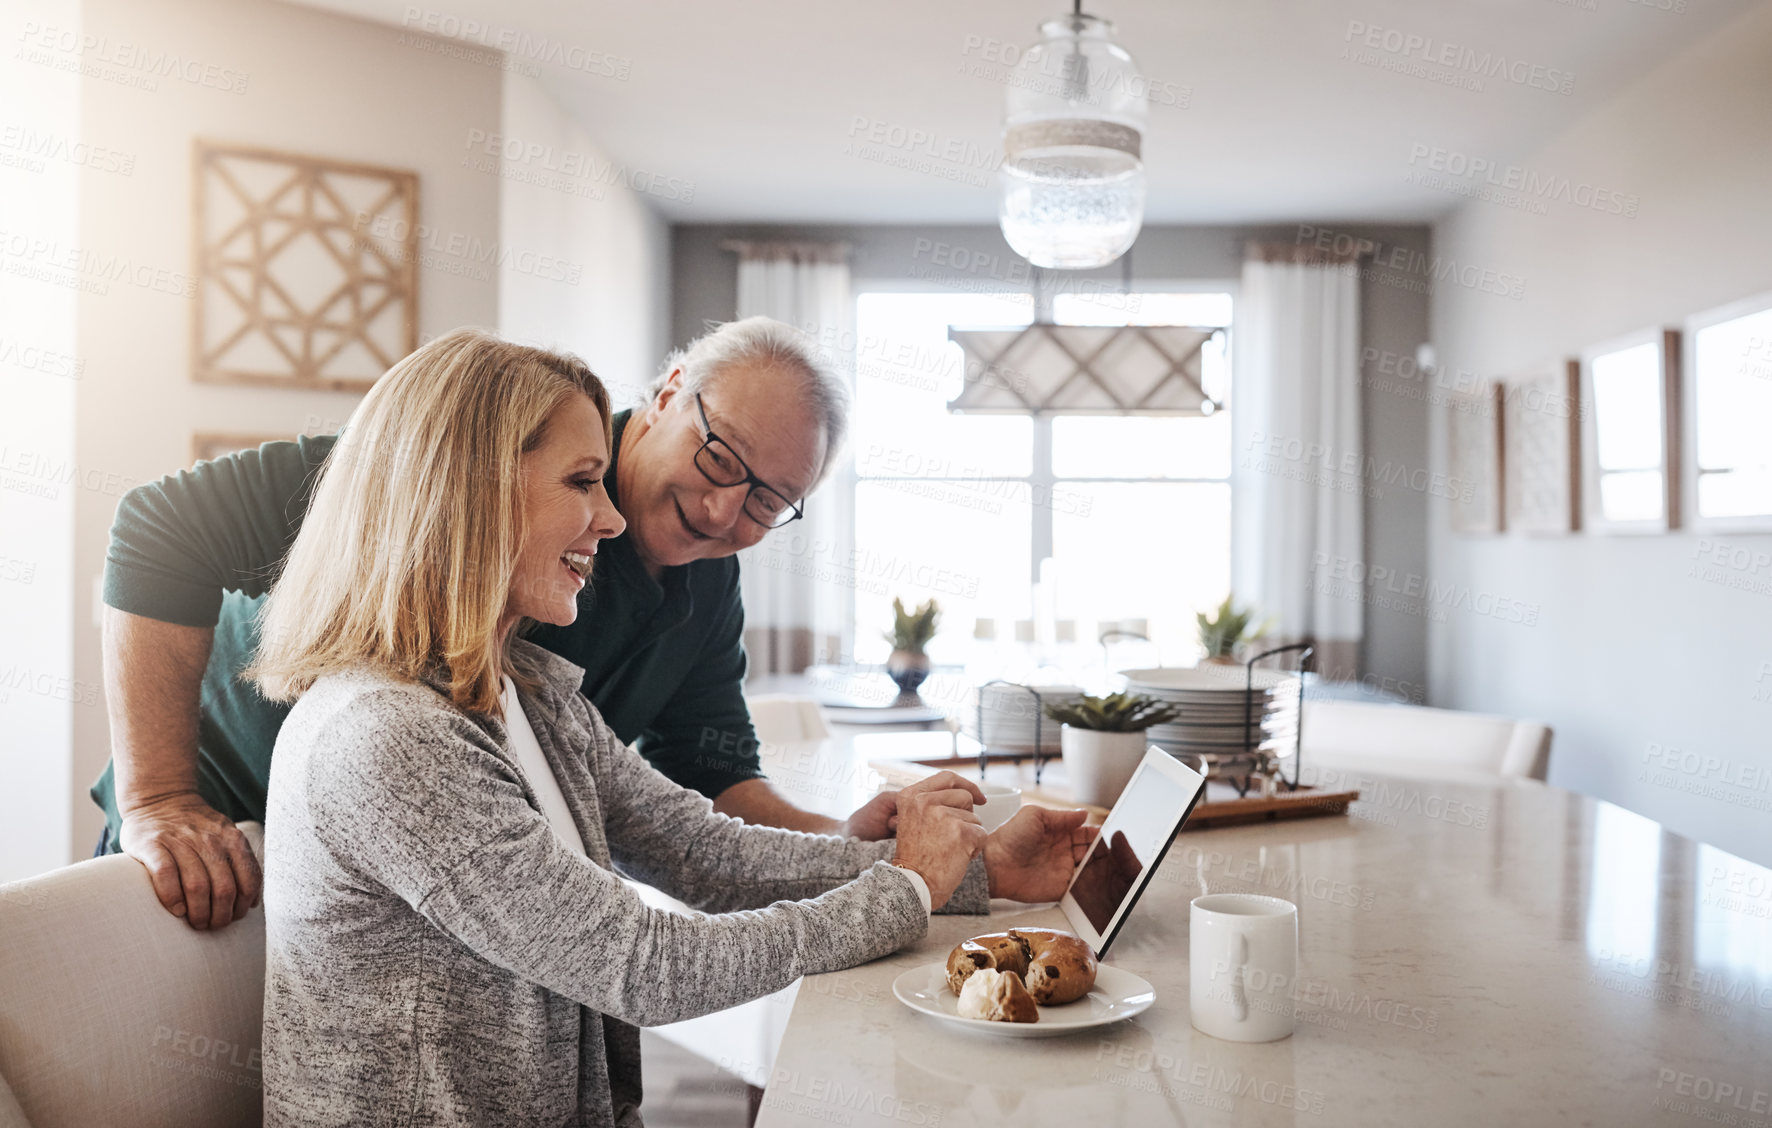 Buy stock photo Shot of a mature woman using a digital tablet during a relaxed morning at home